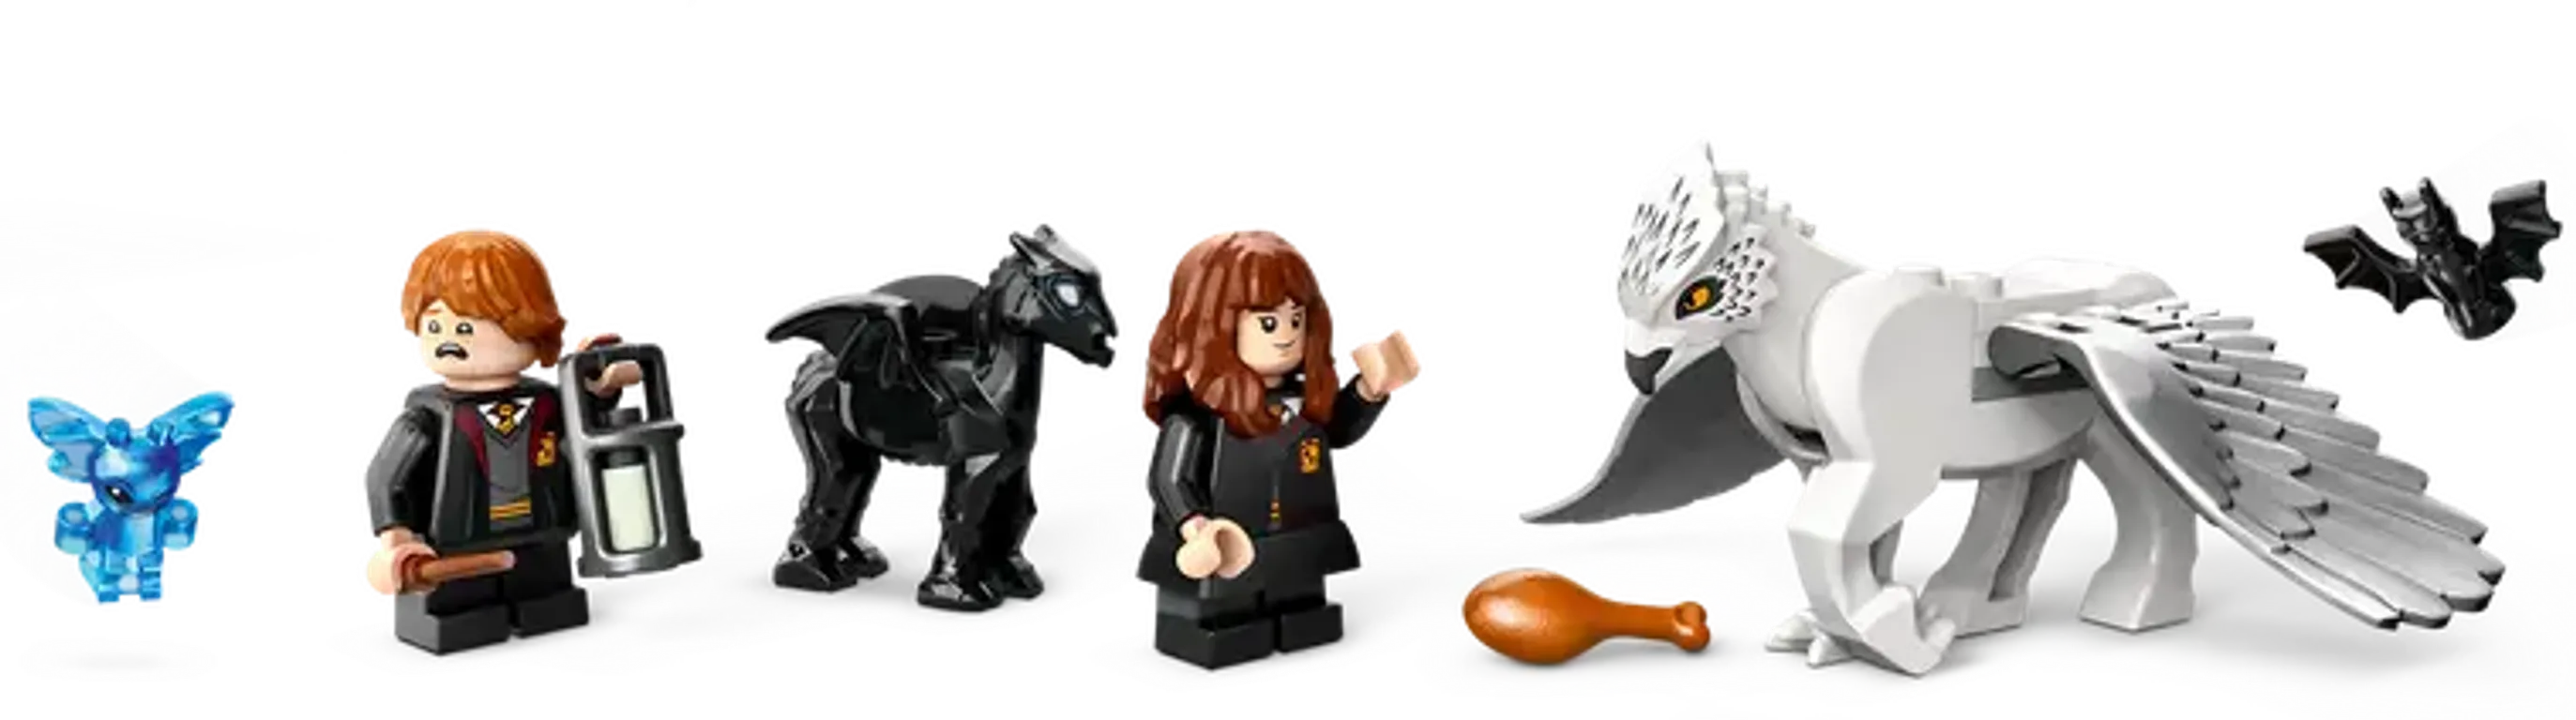 LEGO® Harry Potter™ Forbidden Forest: Magical Creatures minifigures